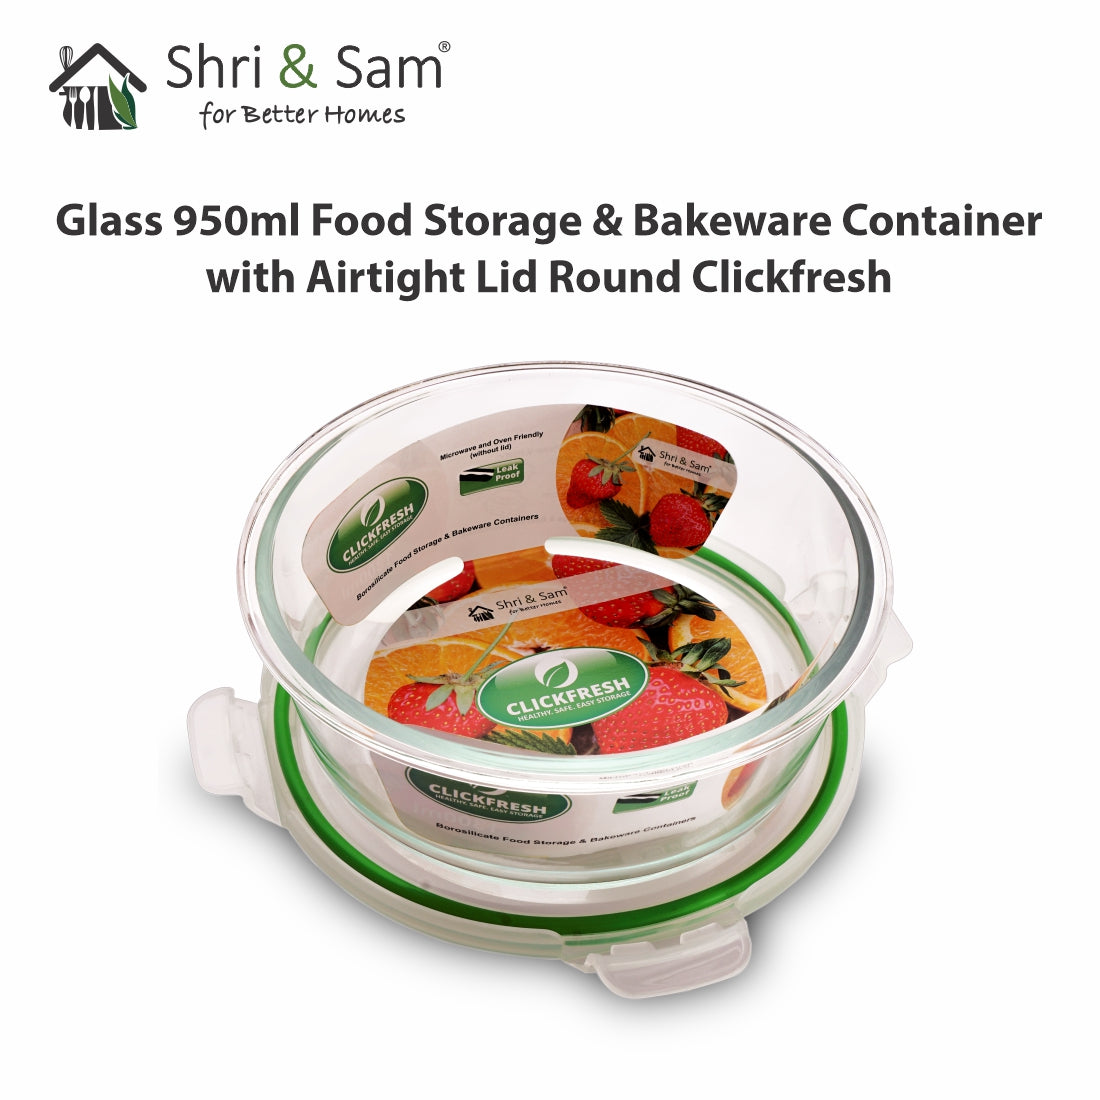 Glass 950ml Food Storage & Bakeware Container with Airtight Lid Round Clickfresh